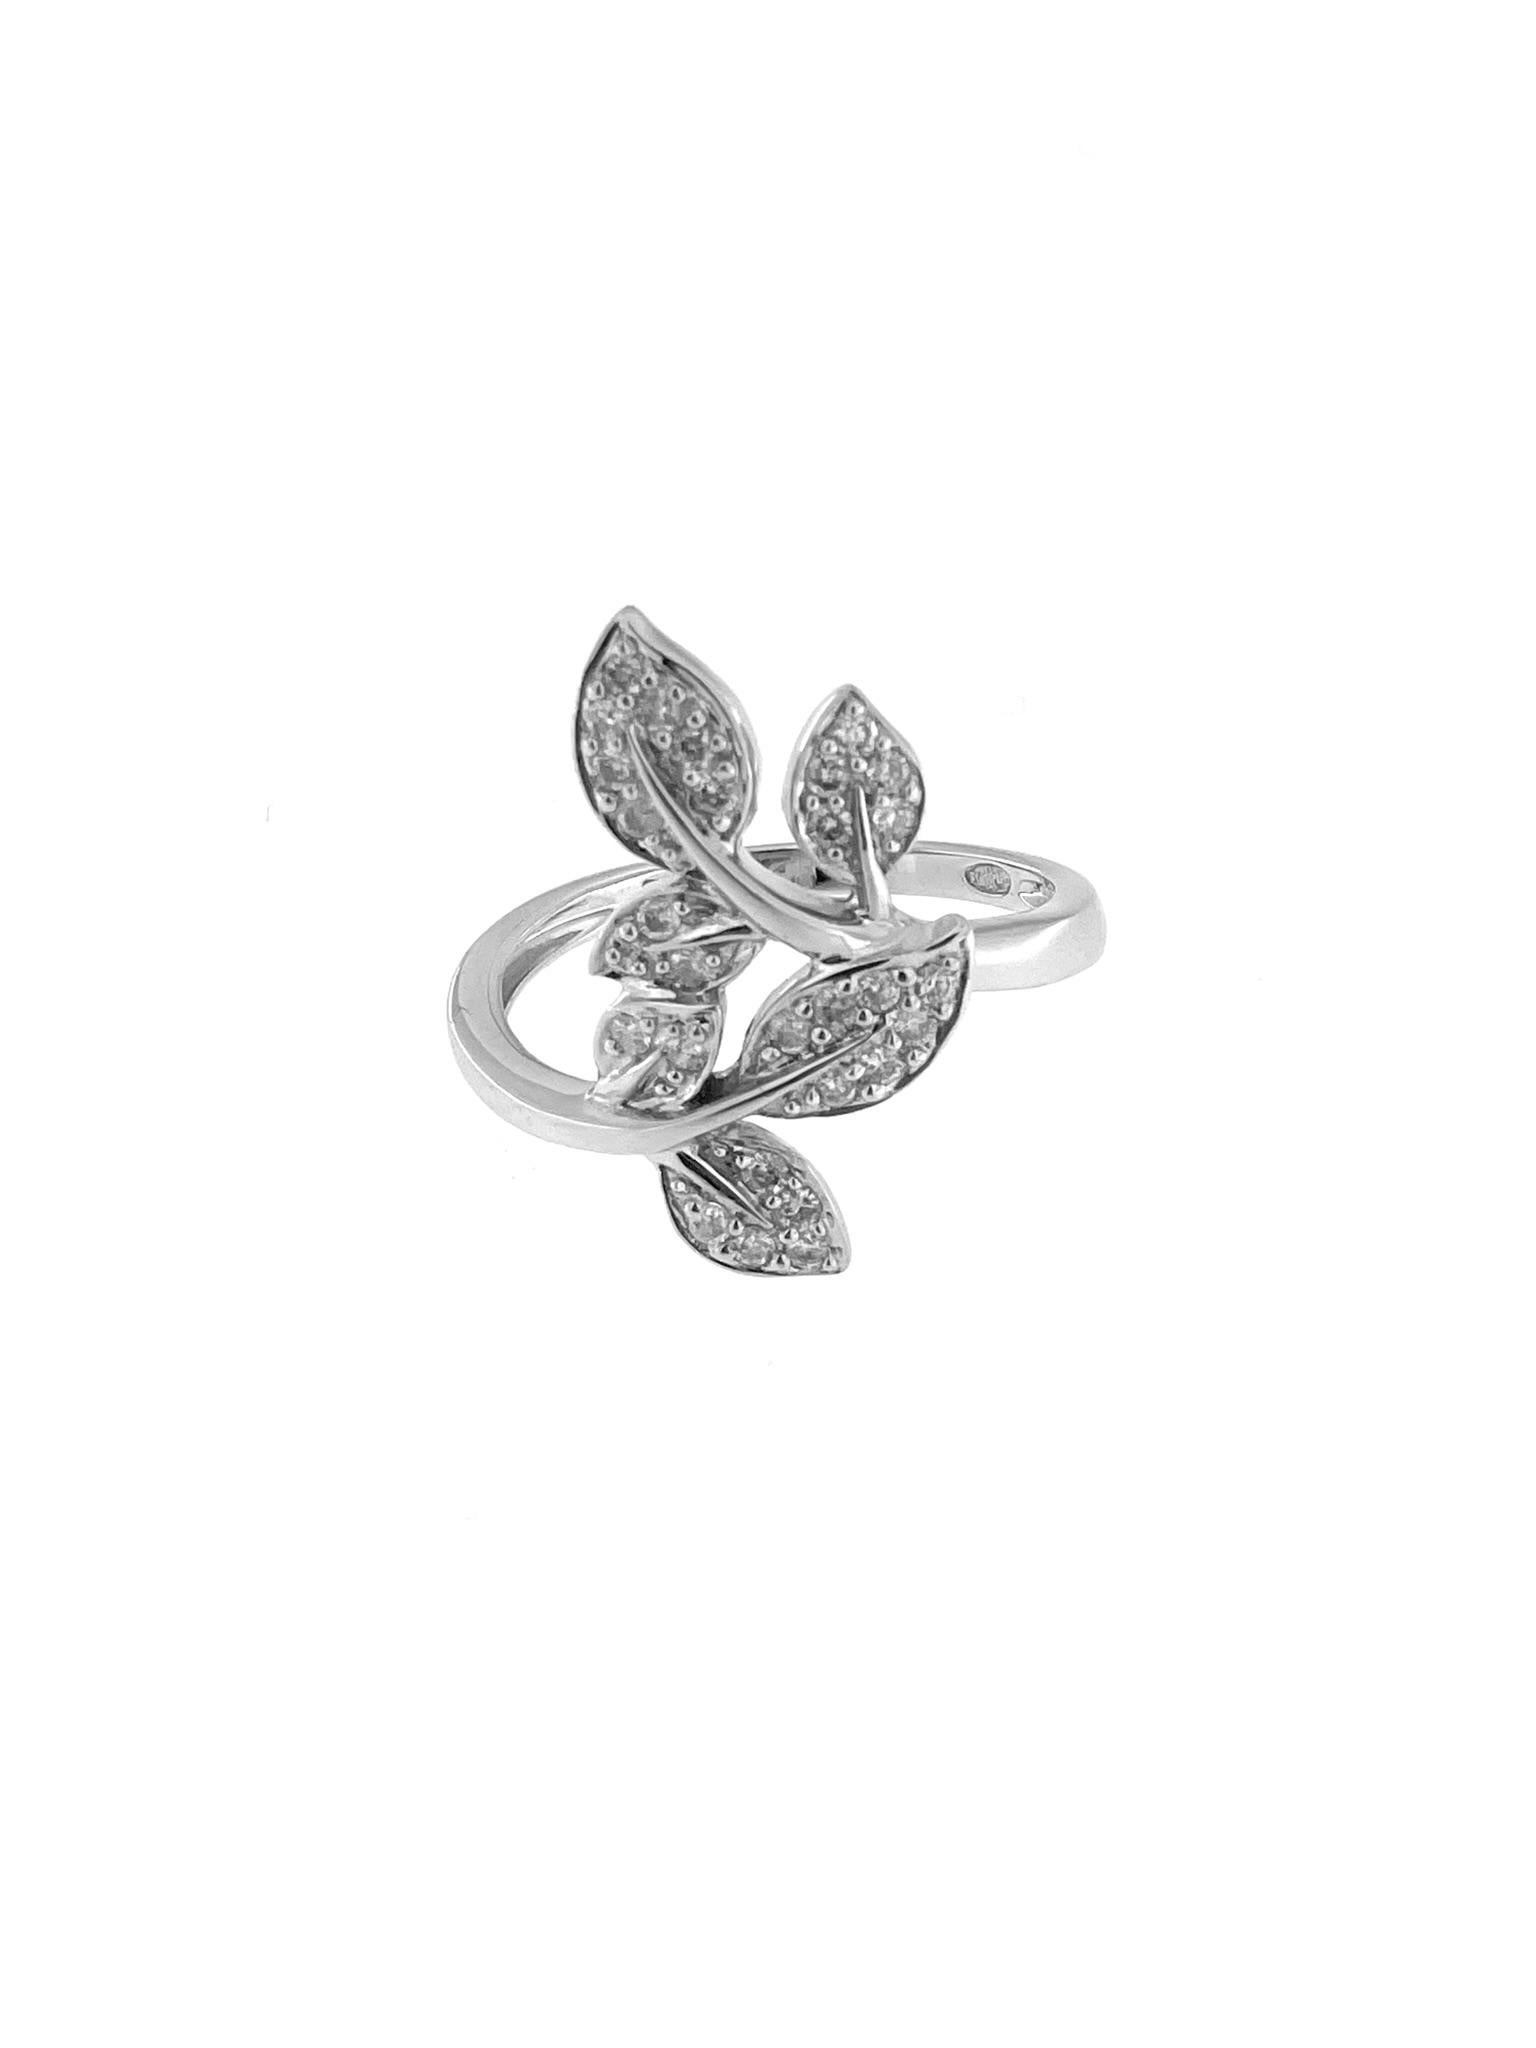 Modern Earrings and Ring Leaf Design Set White Gold and Diamonds For Sale 3